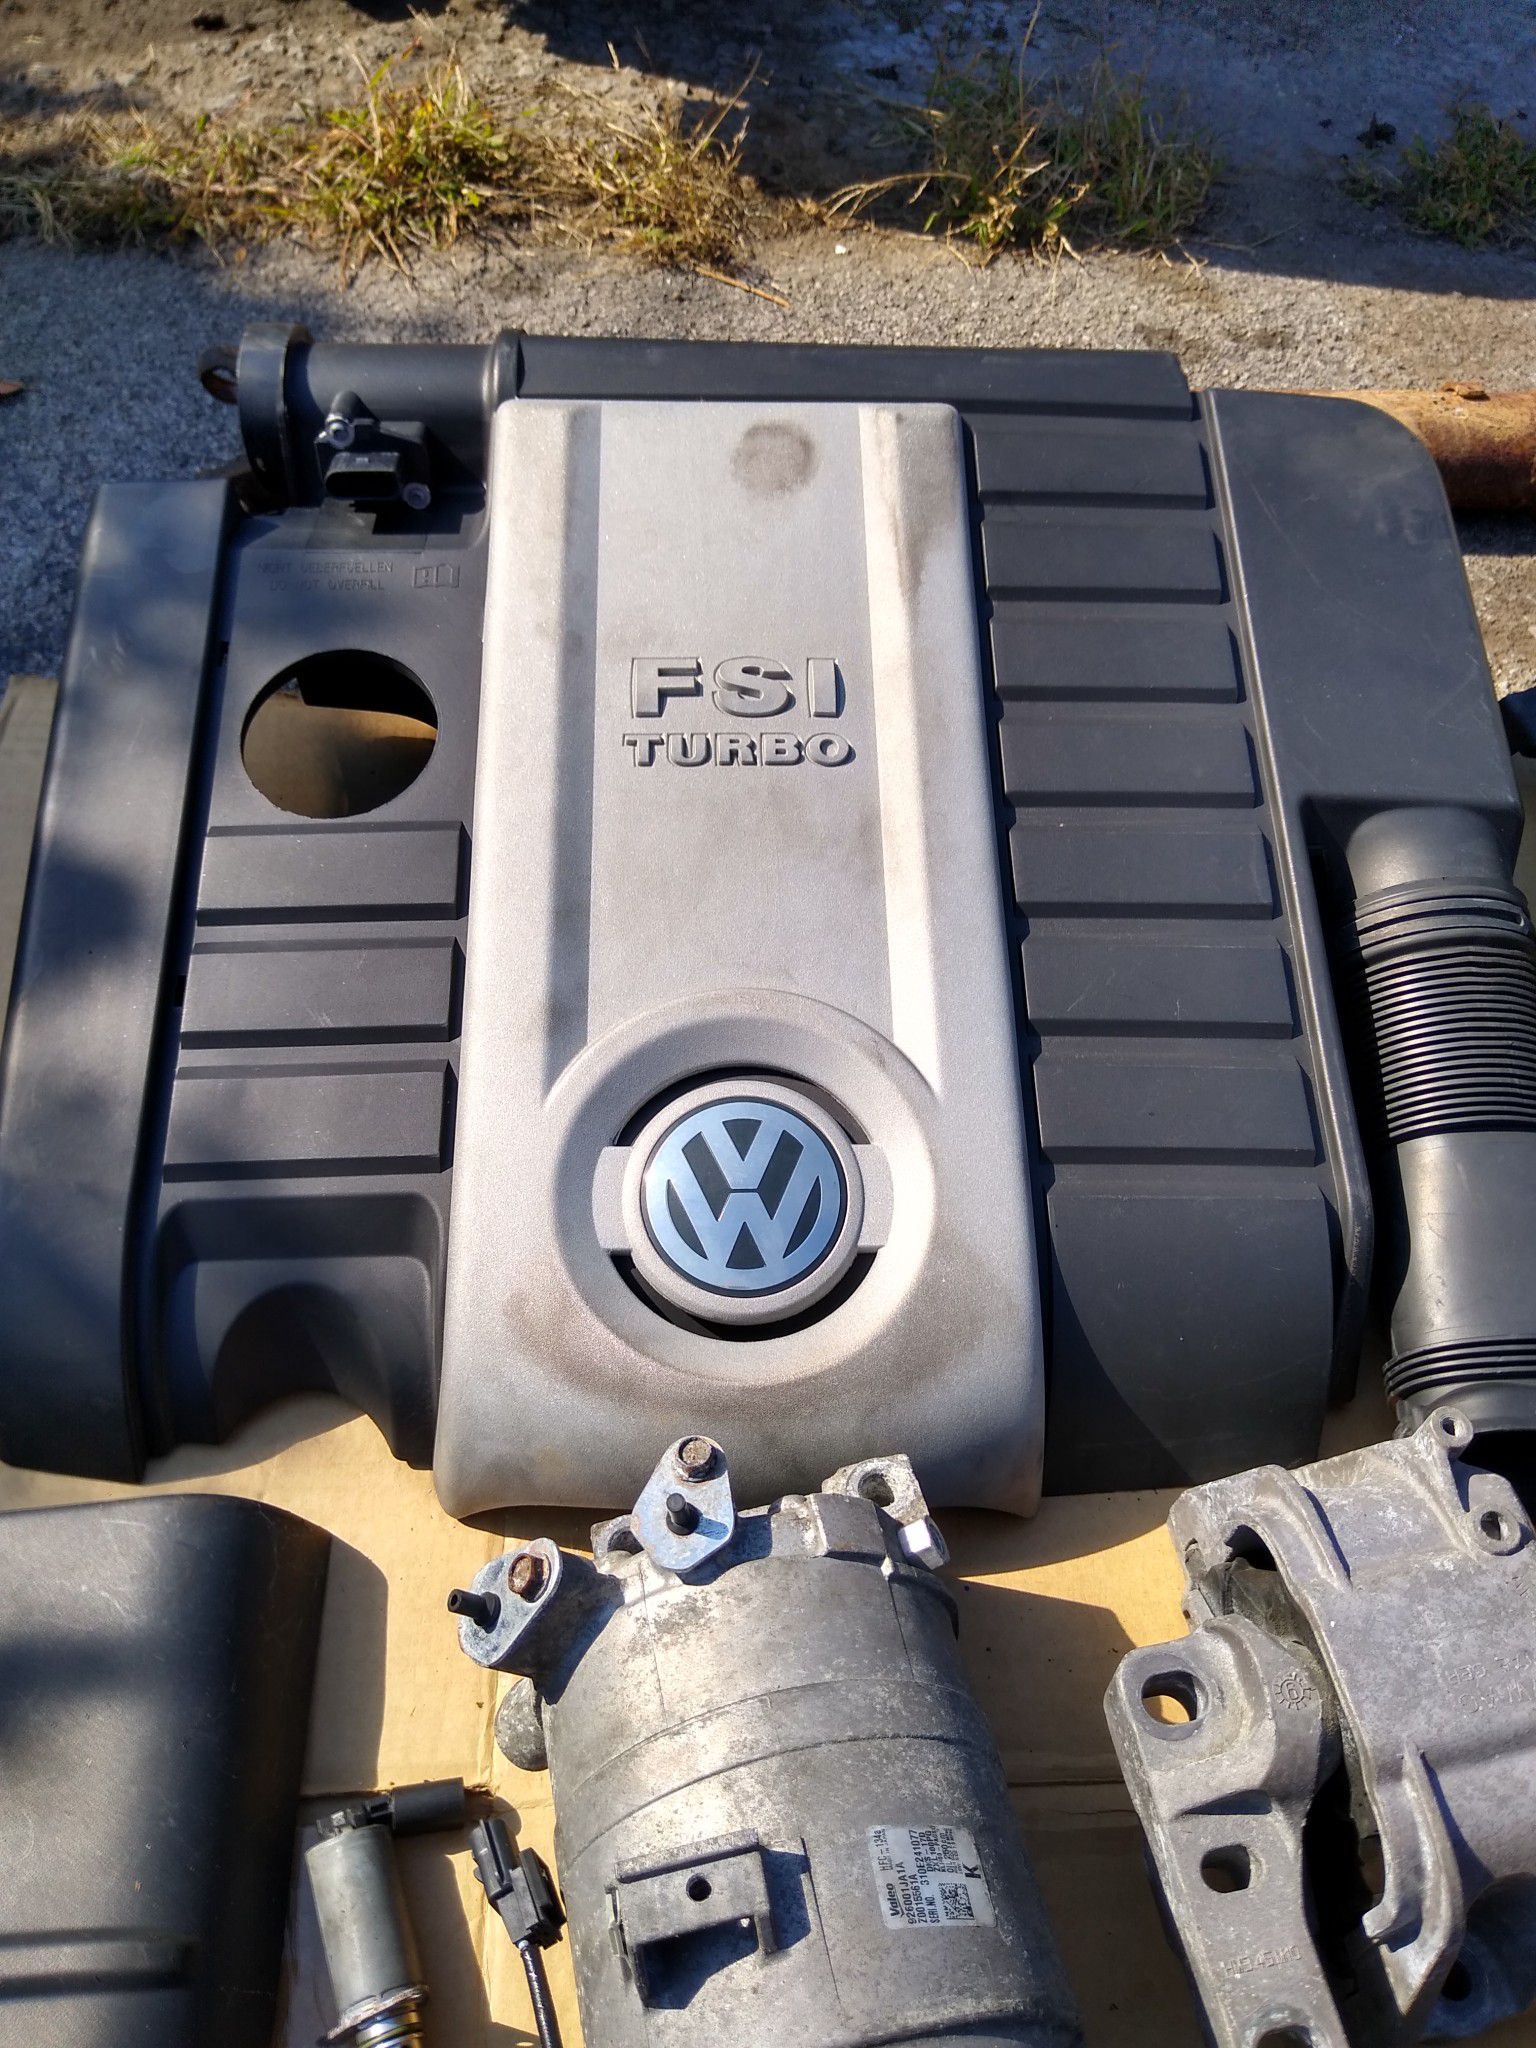 Volkswagen and Audi 2.0 Turbo engine parts